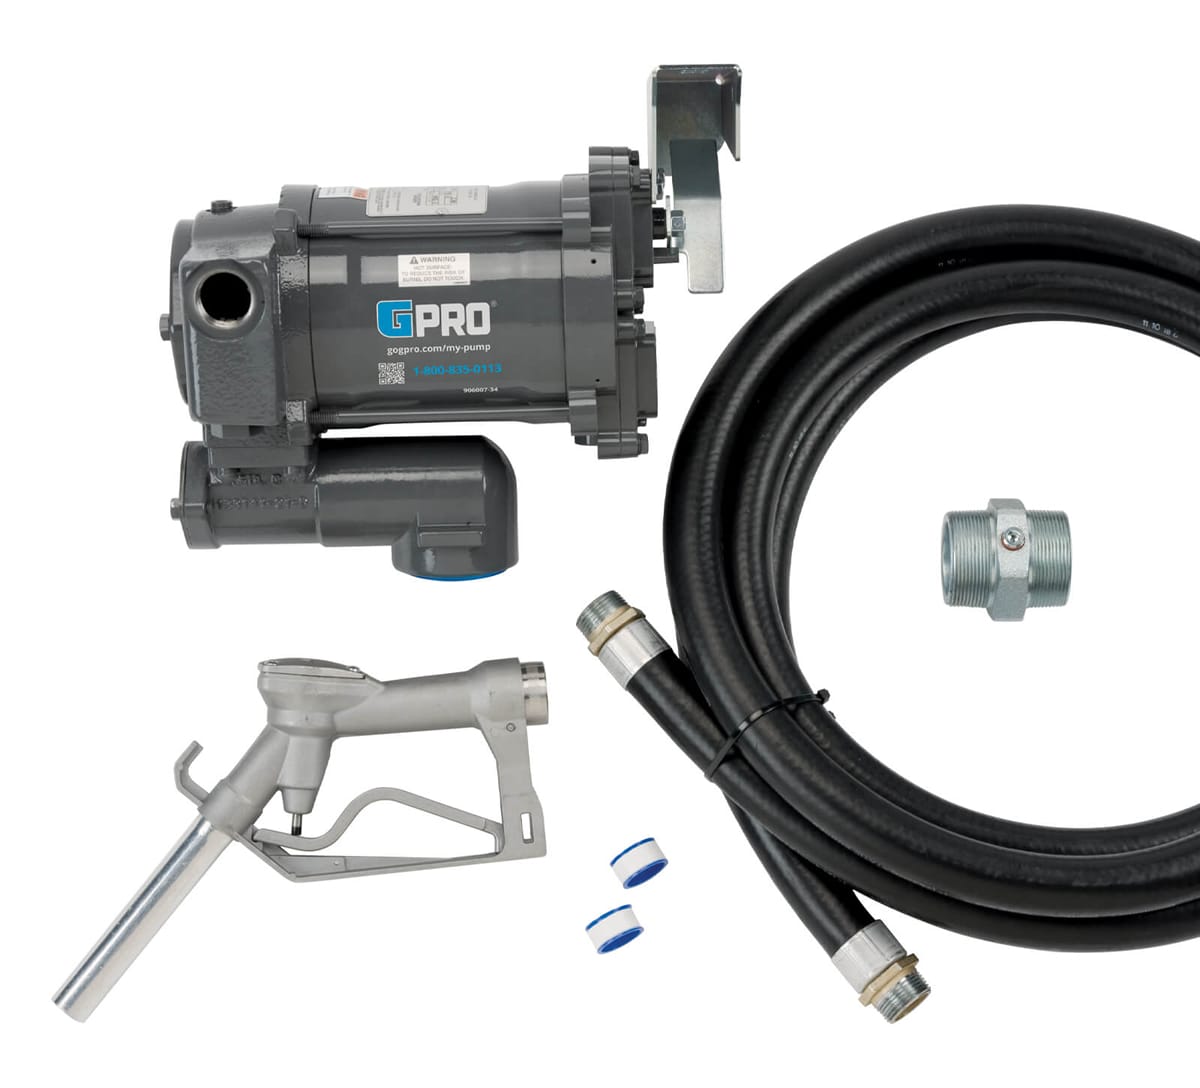 ITEM 503000-02

PRO20-115MD

VOLTAGE: 115V (AC)
NOZZLE TYPE: 1 in. FNPT Inlet, Manual Shut-off, Diesel
MOUNTING TYPE: Direct Mount, 2in. male NPT
DISPENSING HOSE: 18ft. (5.5M) x 1 in.
POWER CORD: Power cord Not Included
COMPATIBLE FUELS:
Gasoline up to E15|Diesel up to B20|Kerosene||

PRO20-115 SERIES OVERVIEW
Add The First Review 1 question
The GPRO PRO20-115 professional-grade fuel transfer pump is the pump of choice for agricultural and construction applications with low viscosity petroleum fuels such as gasoline, diesel fuel, and kerosene delivering flow rates up to 20 GPM (76 L/min). Available in a variety of configurations to meet your application's needs. Pump and Meter combinations available for the complete package. The PRO20-115 is excellent for keeping your fleet on the go, your skidder pulling logs, or your backhoe digging.

BENEFITS INCLUDE:
Center base inlet with check valve
Easy access to fuel strainer
Vacuum breaker ready
Extended duty cycle exceeds industry standards
Thermally protected motor
Field replaceable switch and vanes